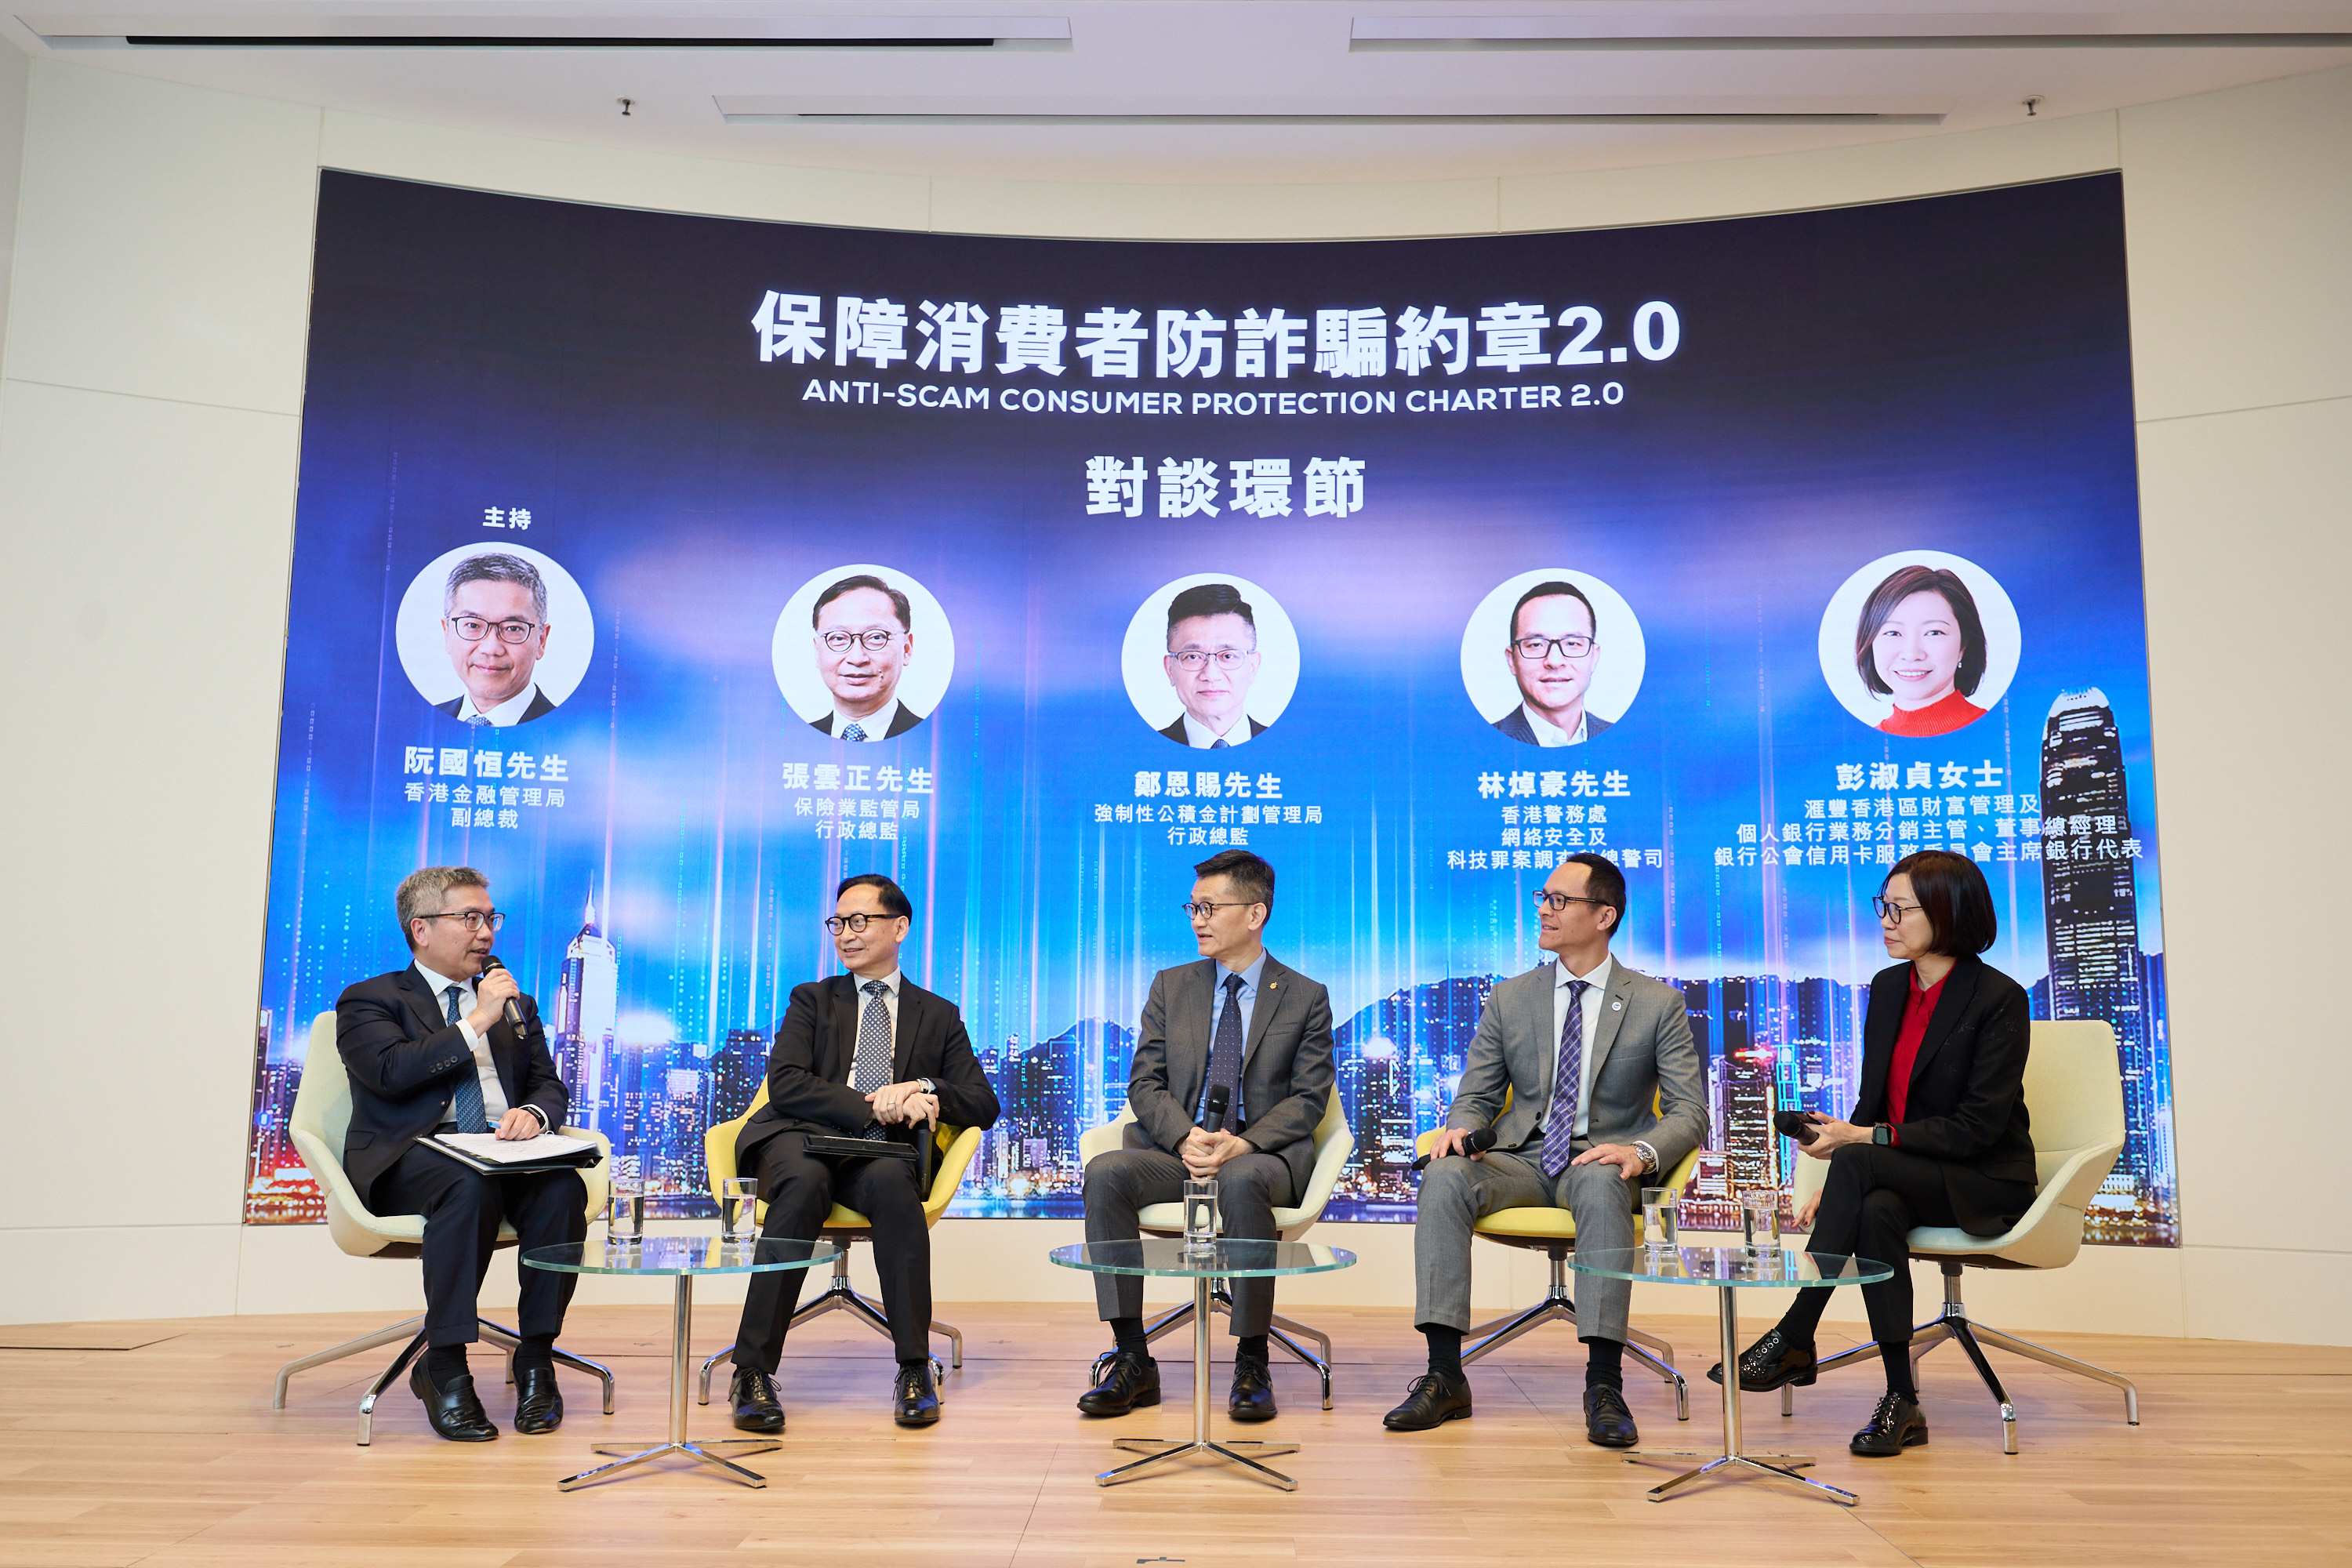 Mr Arthur Yuen, Deputy Chief Executive of the Hong Kong Monetary Authority (first from left); Ms Janet Pang, Managing Director, Head of Distribution, Wealth and Personal Banking Hong Kong, HSBC and Representative of the Chairman Bank in the Card Service Committee of the Hong Kong Association of Banks (fifth from left); Mr Raymond Lam, Chief Superintendent of Police of the Cyber Security & Technology Crime Bureau of the Hong Kong Police Force (fourth from left); Mr Clement Cheung, Chief Executive Officer of the Insurance Authority (second from left); and Mr Cheng Yan-chee, Managing Director of the Mandatory Provident Fund Schemes Authority (third from left) share the latest landscape on the modus operandi of scams and actions on combatting scams at a fireside chat of the Anti-Scam Consumer Protection Charter 2.0 event.